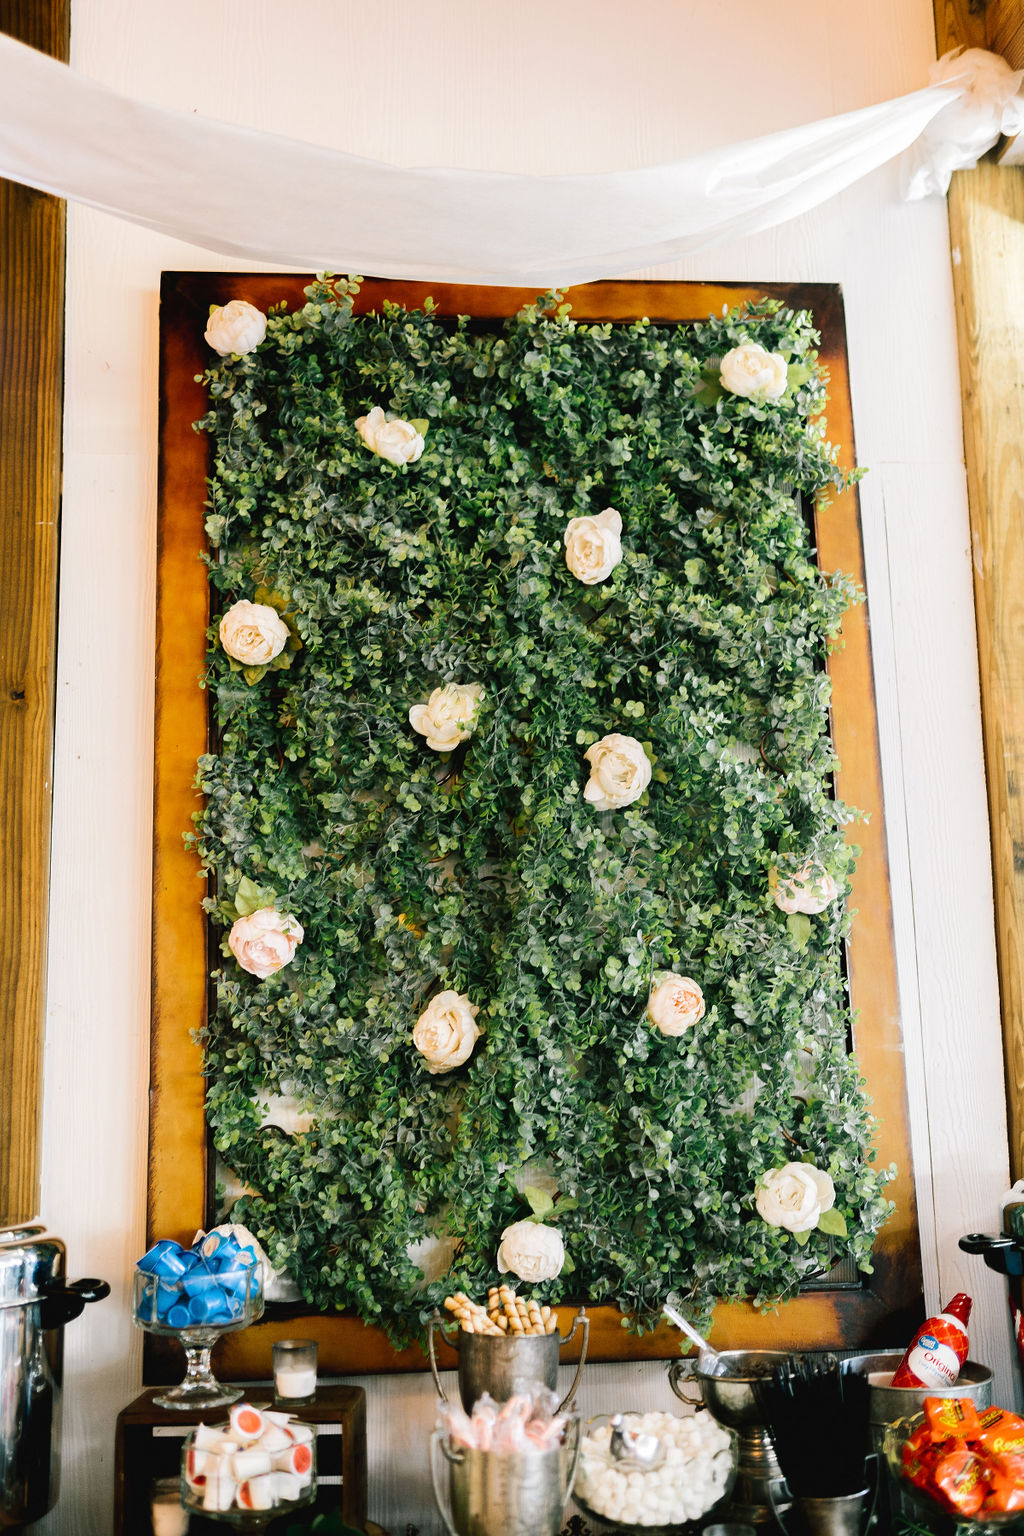 greenery wall included roses placed throughout